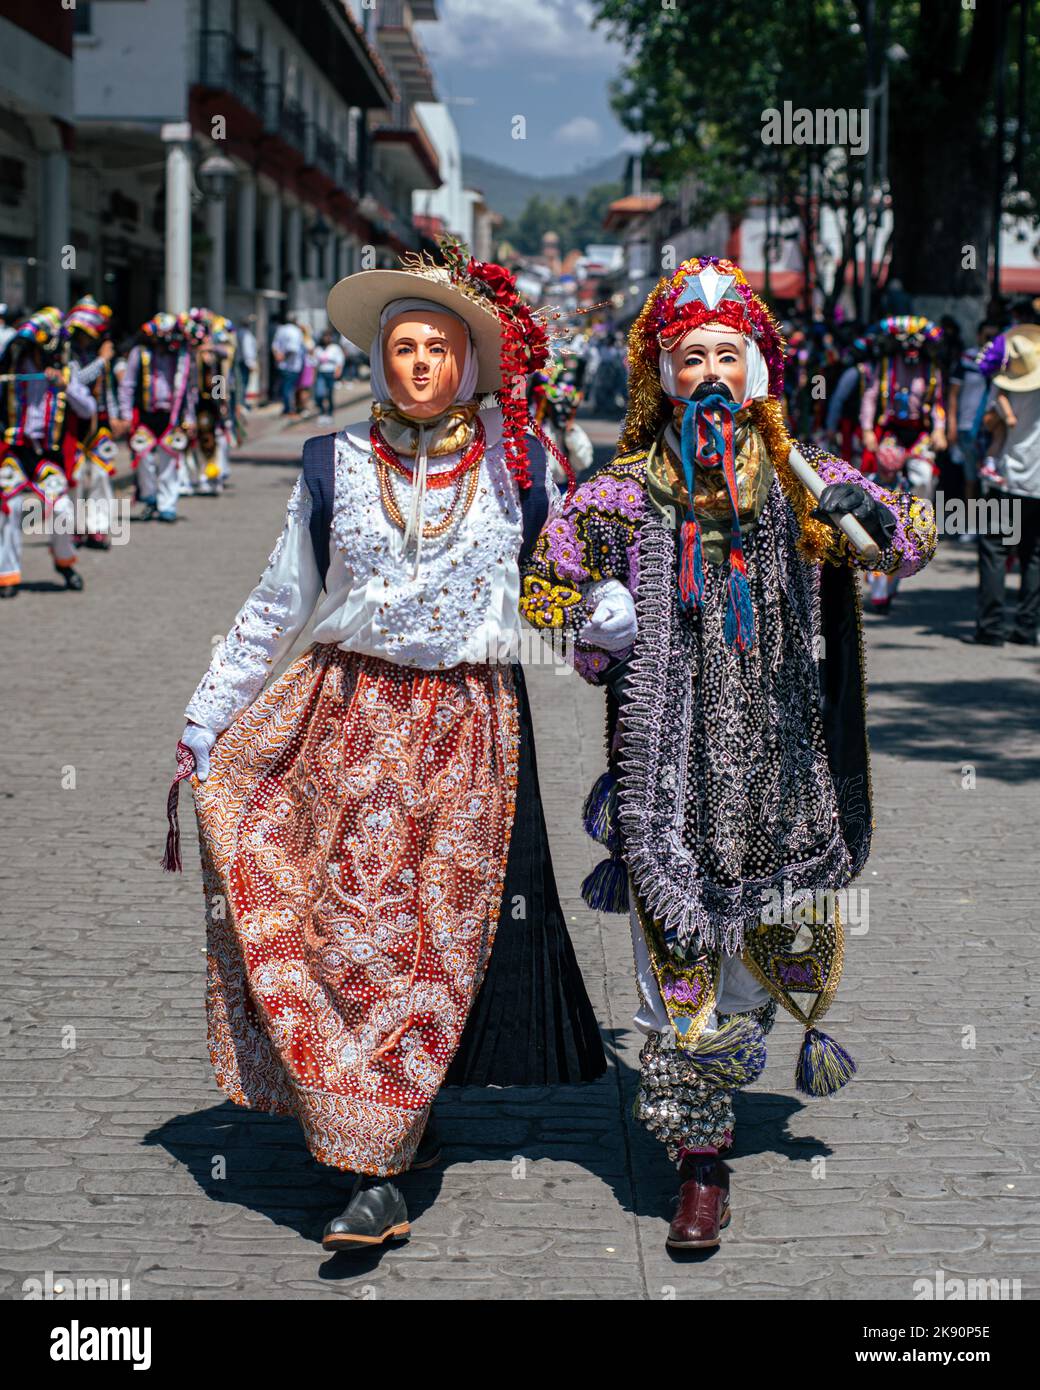 A vertical shot of a couple in traditional Mexican masks and costumes walking on the streets during a festival Stock Photo